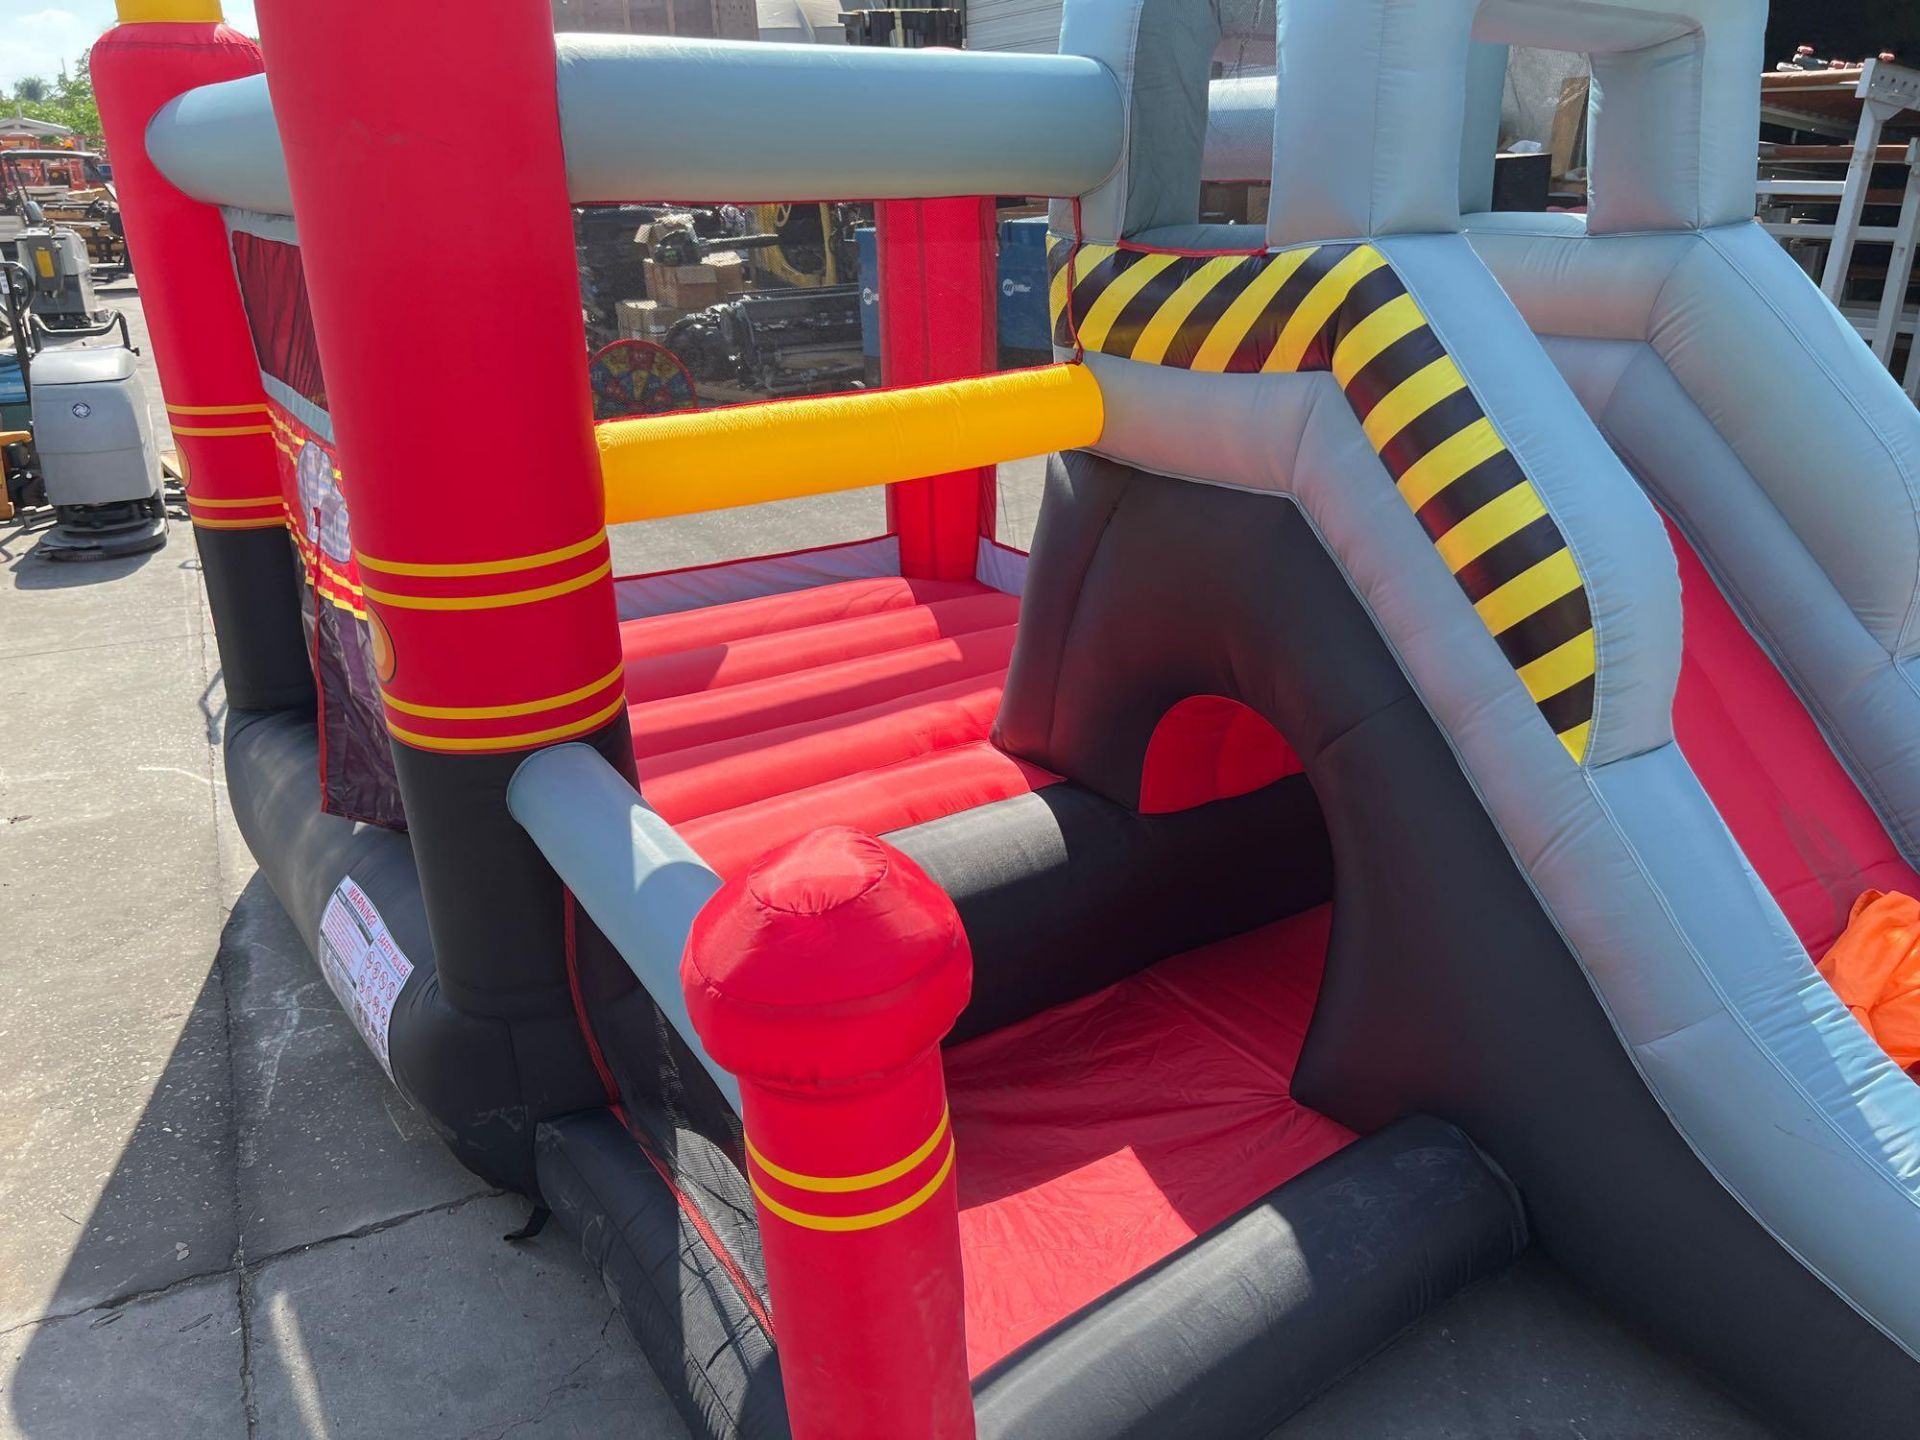 UNUSED BLOW-UP BOUNCY FIRE STATION PLAY YARD WITH SLIDE, VELCRO DARTS, BALLS, STAKES, & BLOWER - Image 2 of 12